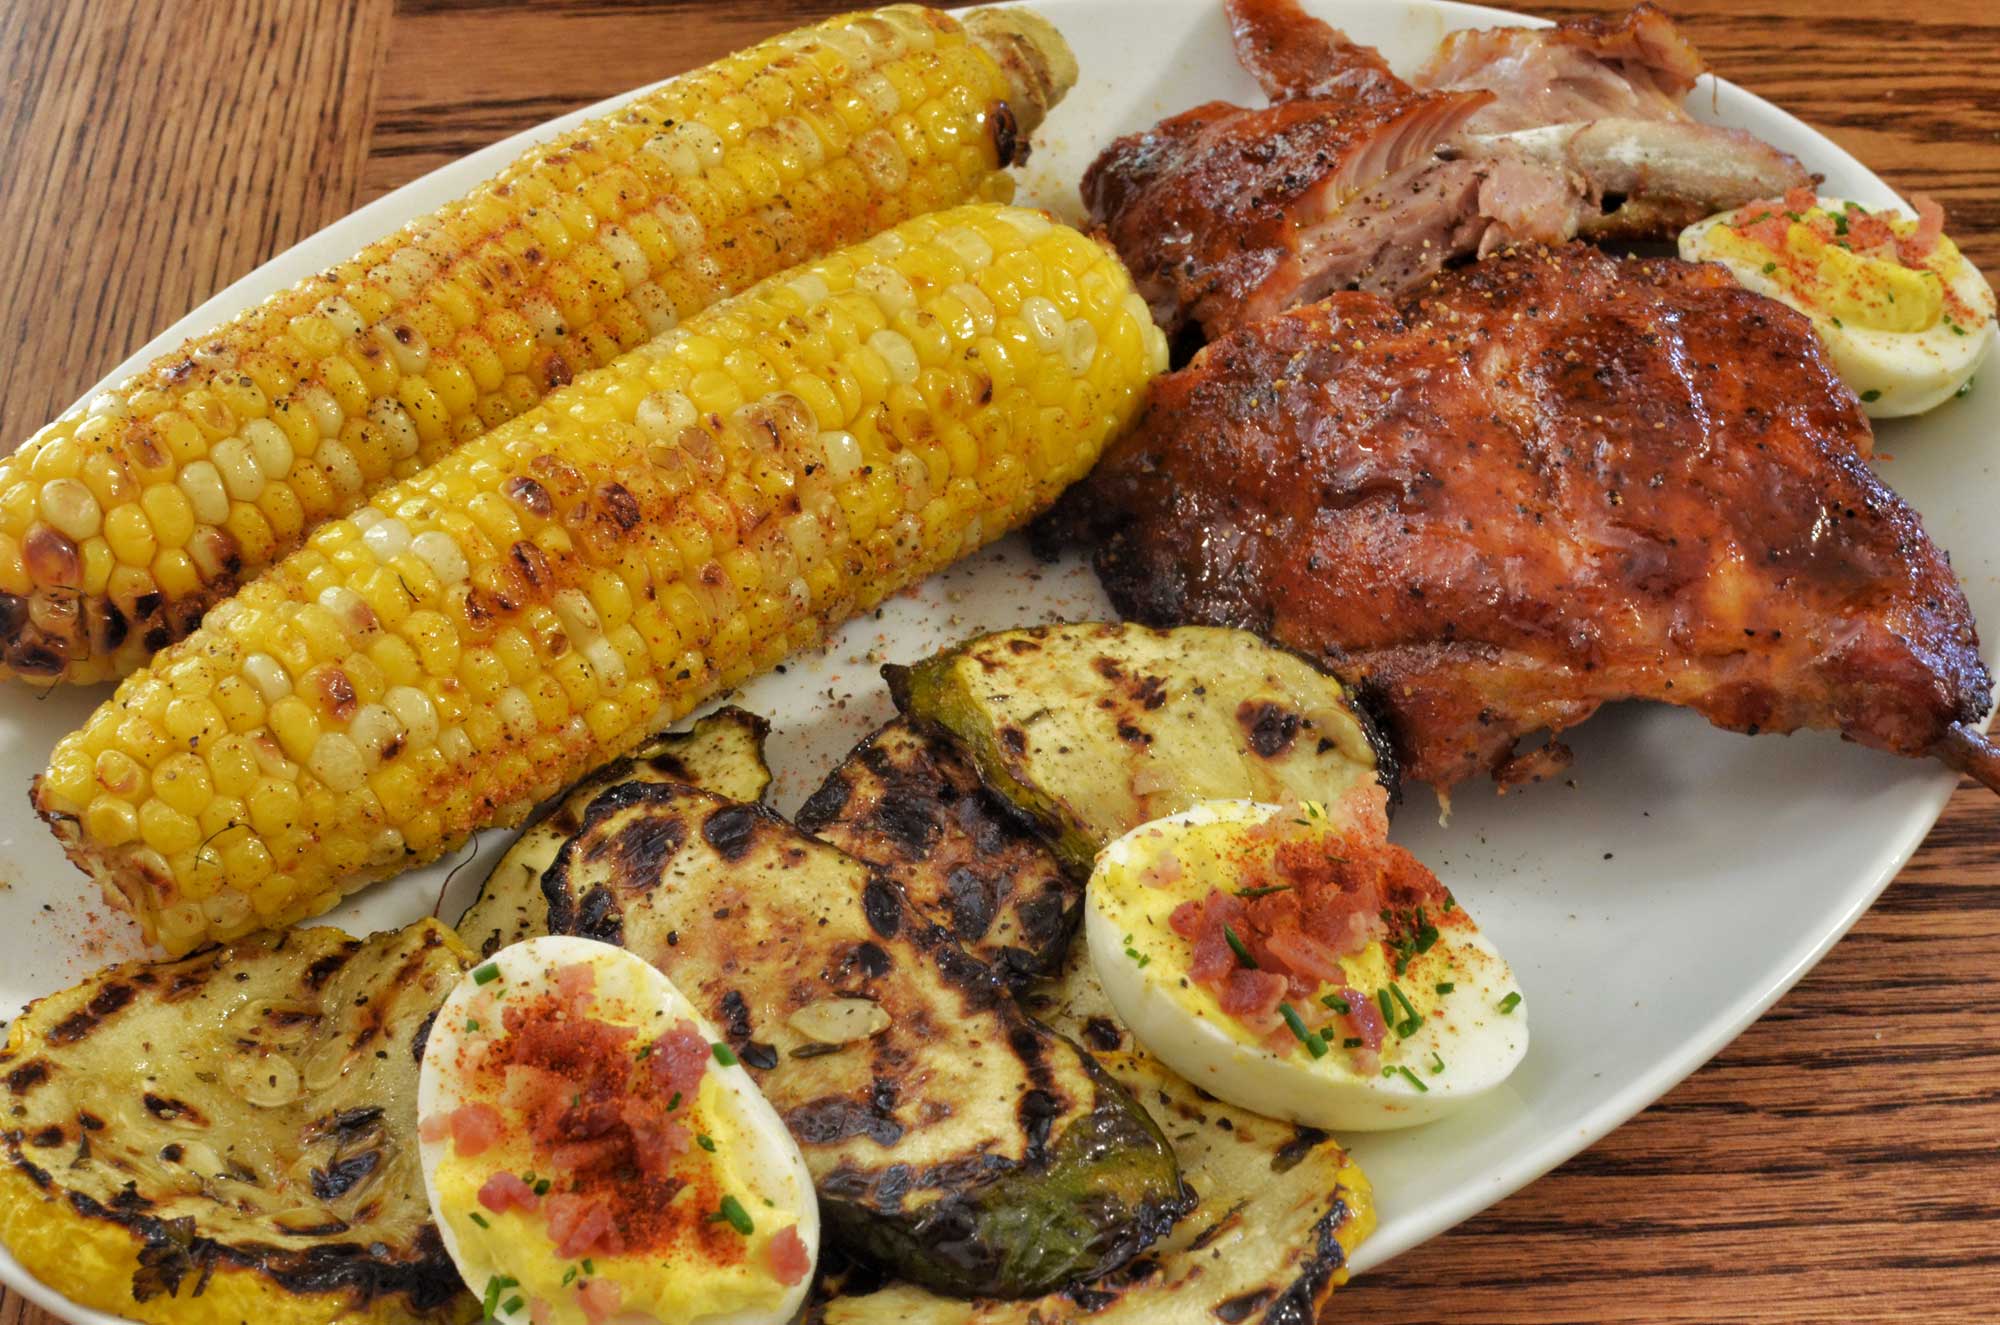 Photograph of a meal including sweet corn on the cob. The photo shows ribs, grilled squash slices, deviled eggs, and two sweet corn cobs on a white plate sitting on a wooden surface.